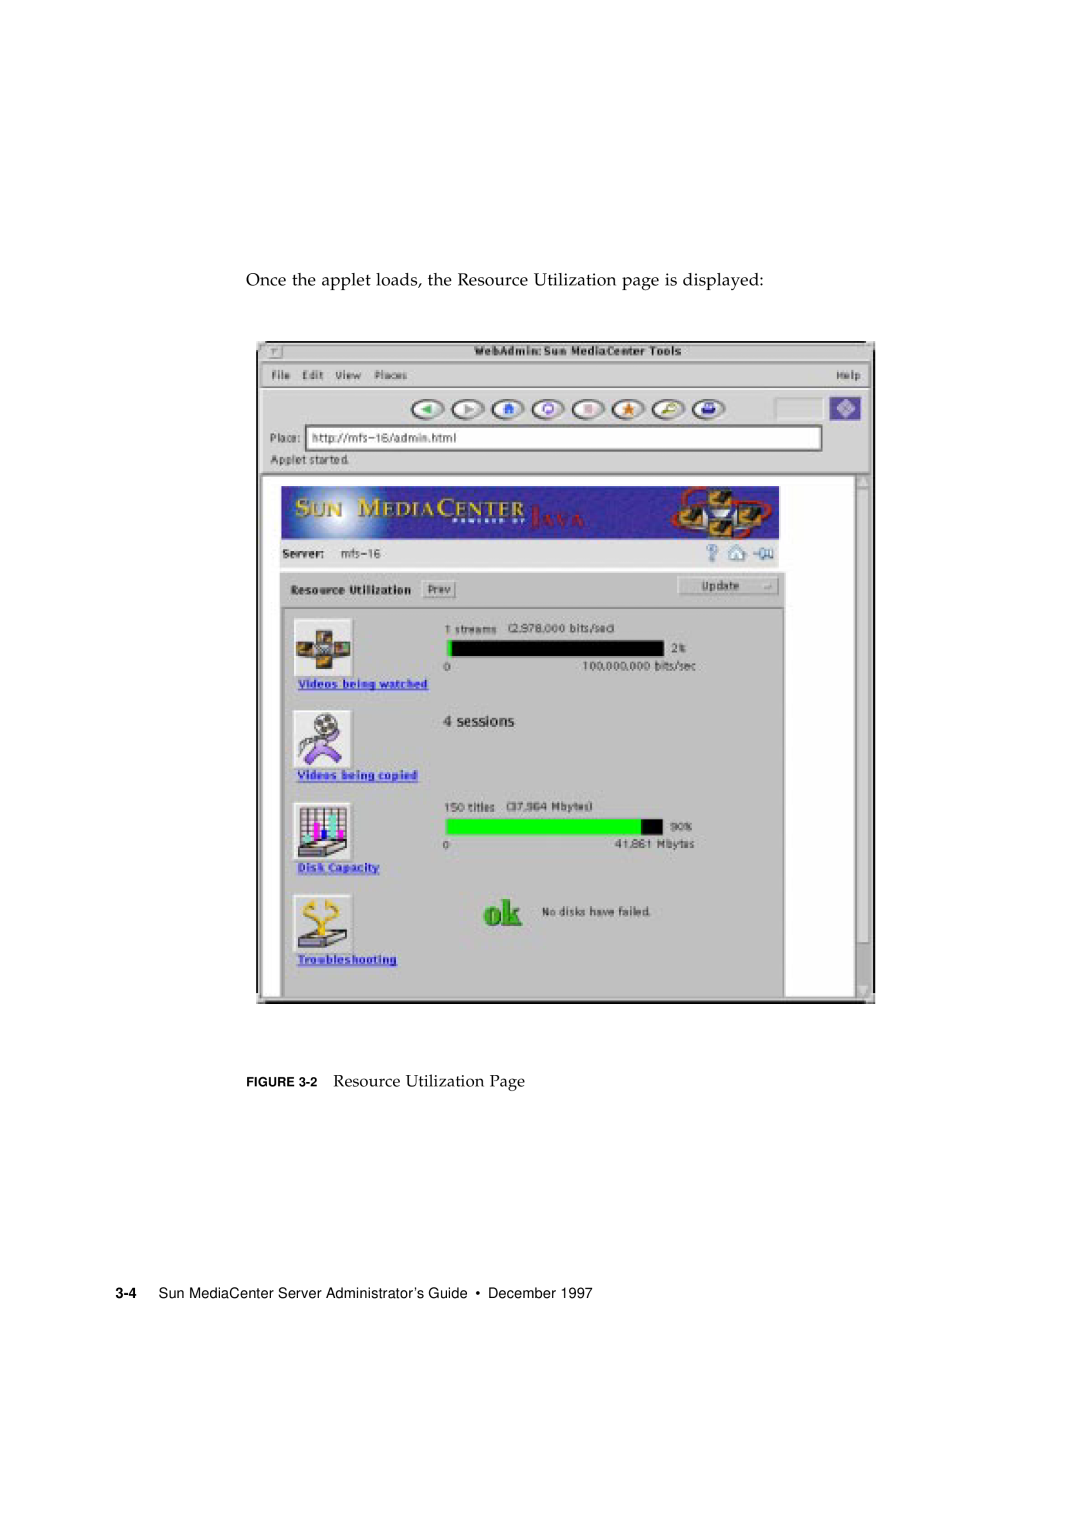 Sun Microsystems 2.1 manual Once the applet loads, the Resource Utilization page is displayed, 2 Resource Utilization Page 